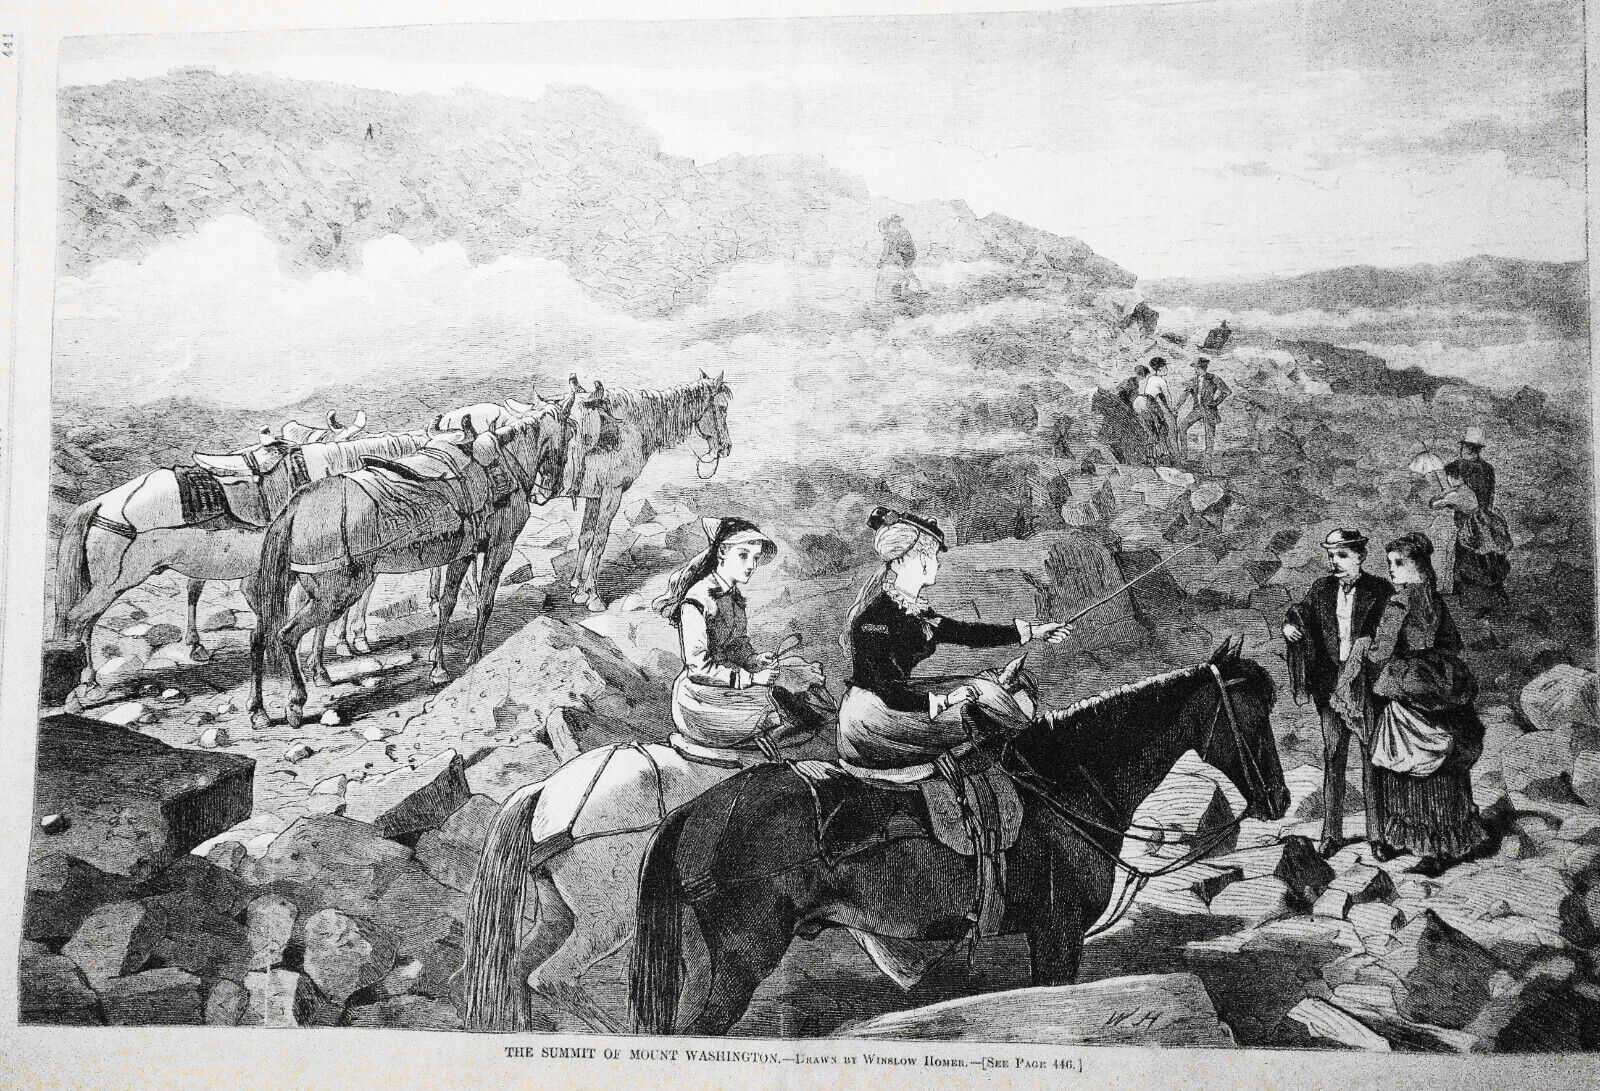 The Summit of Mount Washington by Winslow Homer in Harper's Weekly July 10, 1869